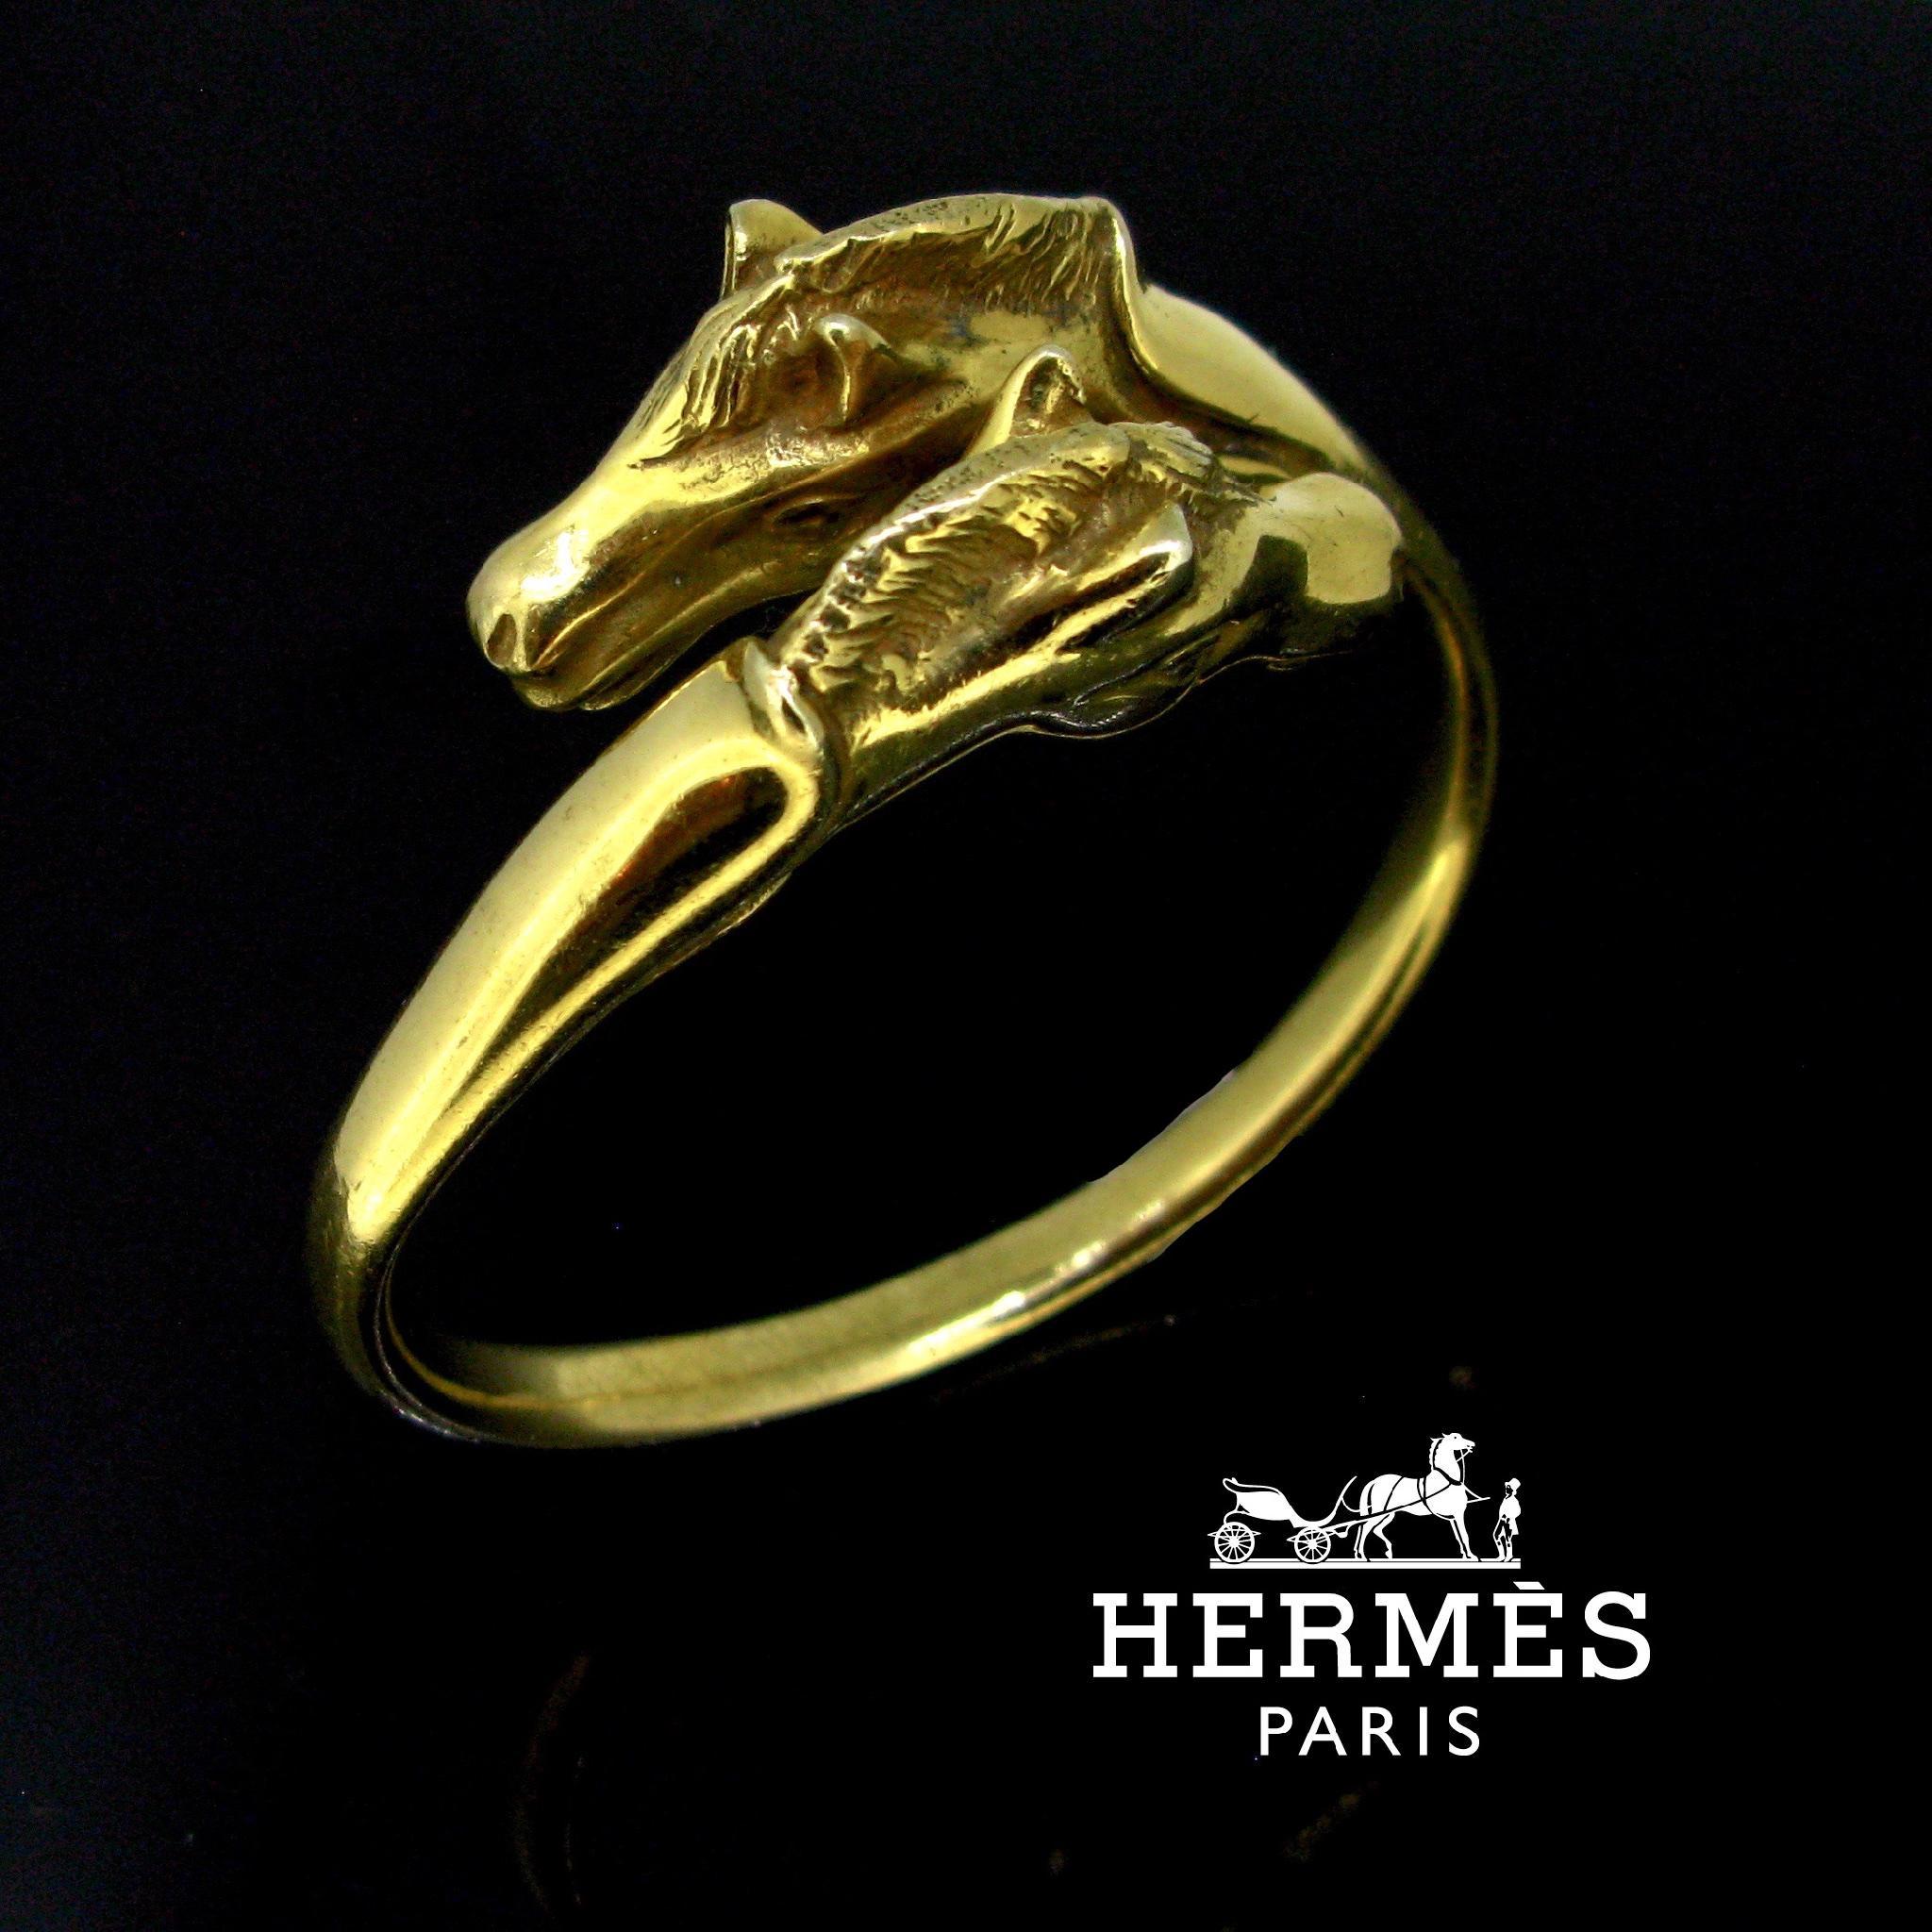 Weight:	96.59


Metal:	Gold Plated 


Condition:	Very Good


Signature:	Hermès Paris


Hallmarks:	Maker’s mark: R – clover – D for RAVINET D’ENFERT


Comments: 	This open bangle features two crossing horse heads. It is fully made in gold plated and